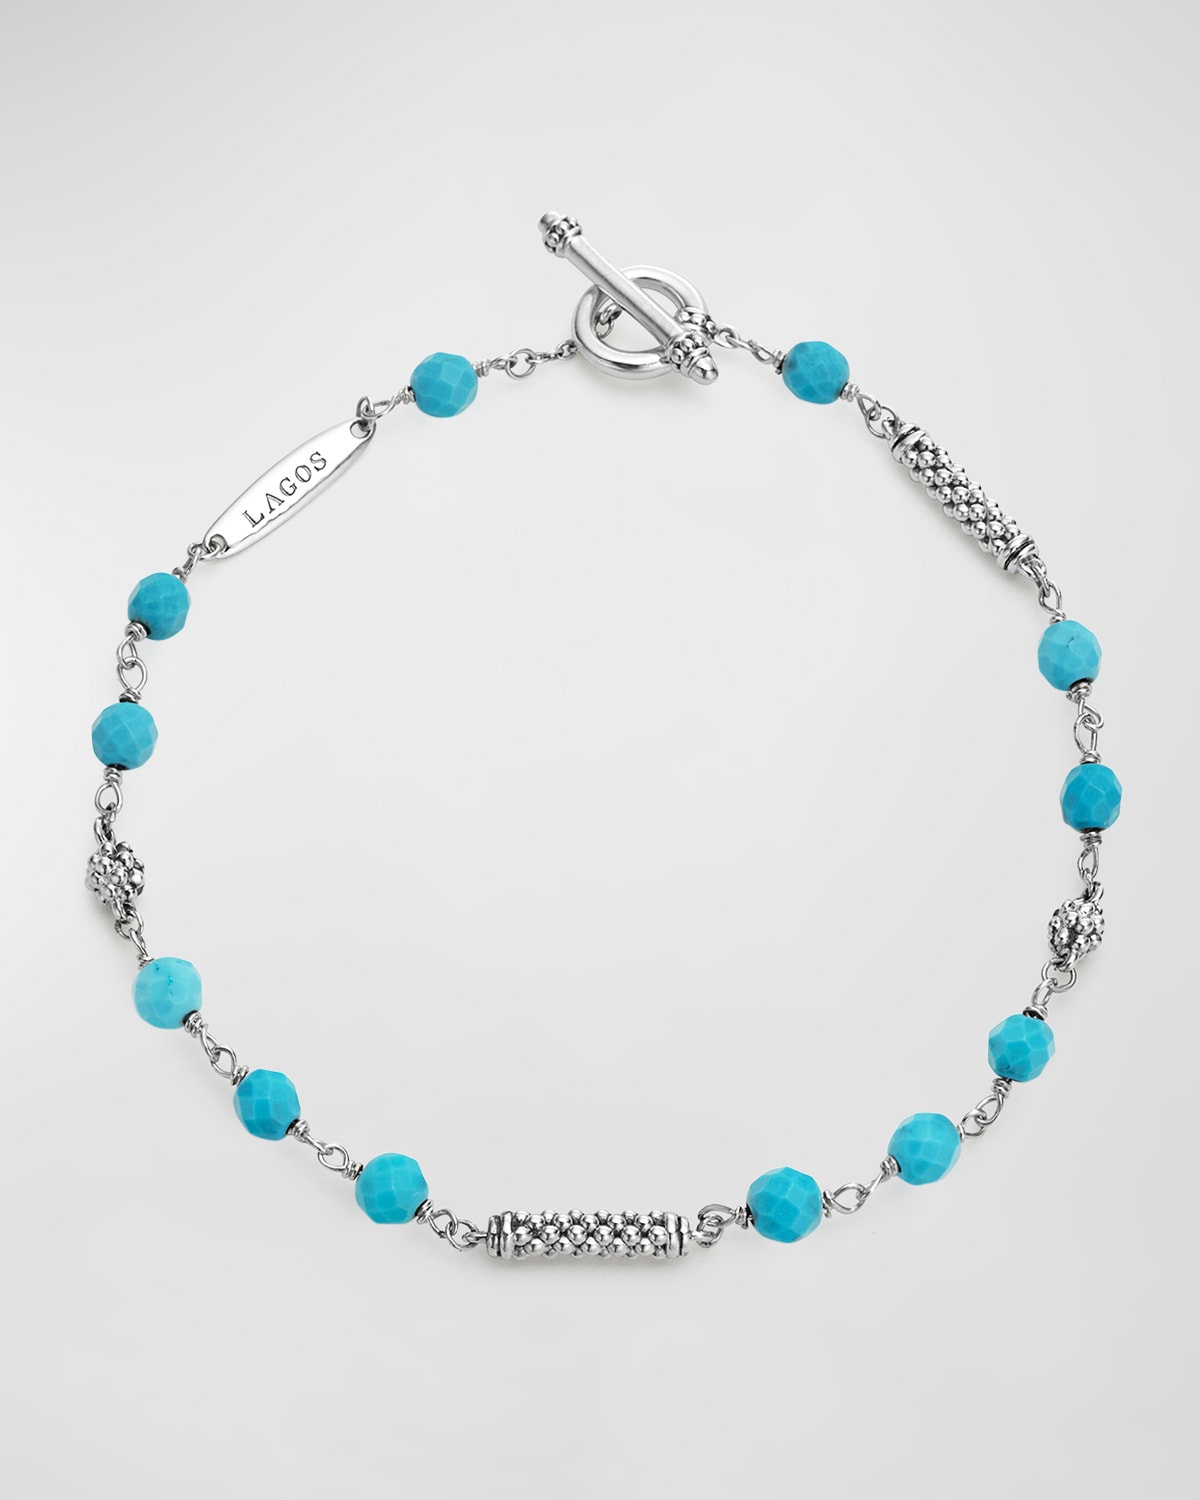 LAGOS CAVIAR ICON STERLING SILVER & TURQUOISE BRACELET